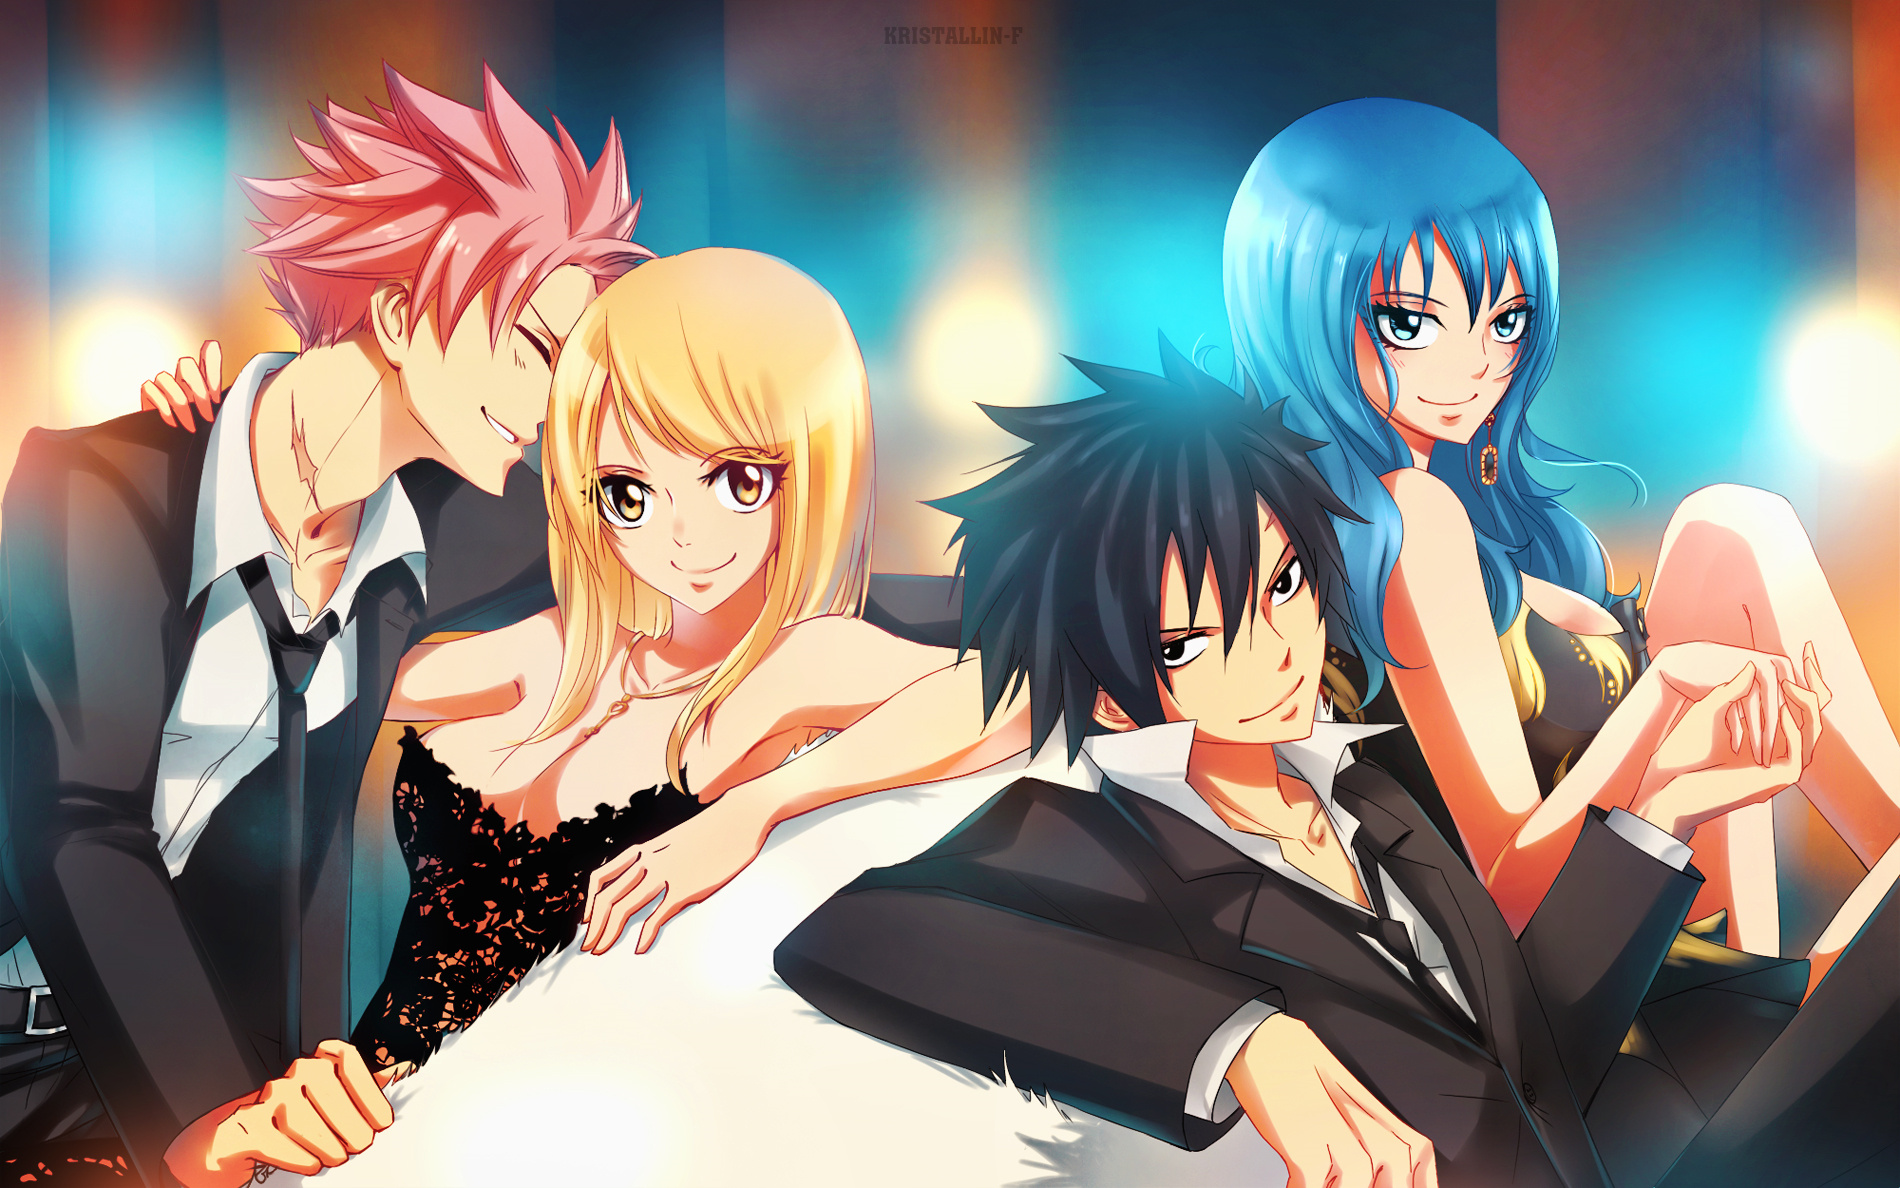 hinh nen fairy tail 2 - wallpaper free download